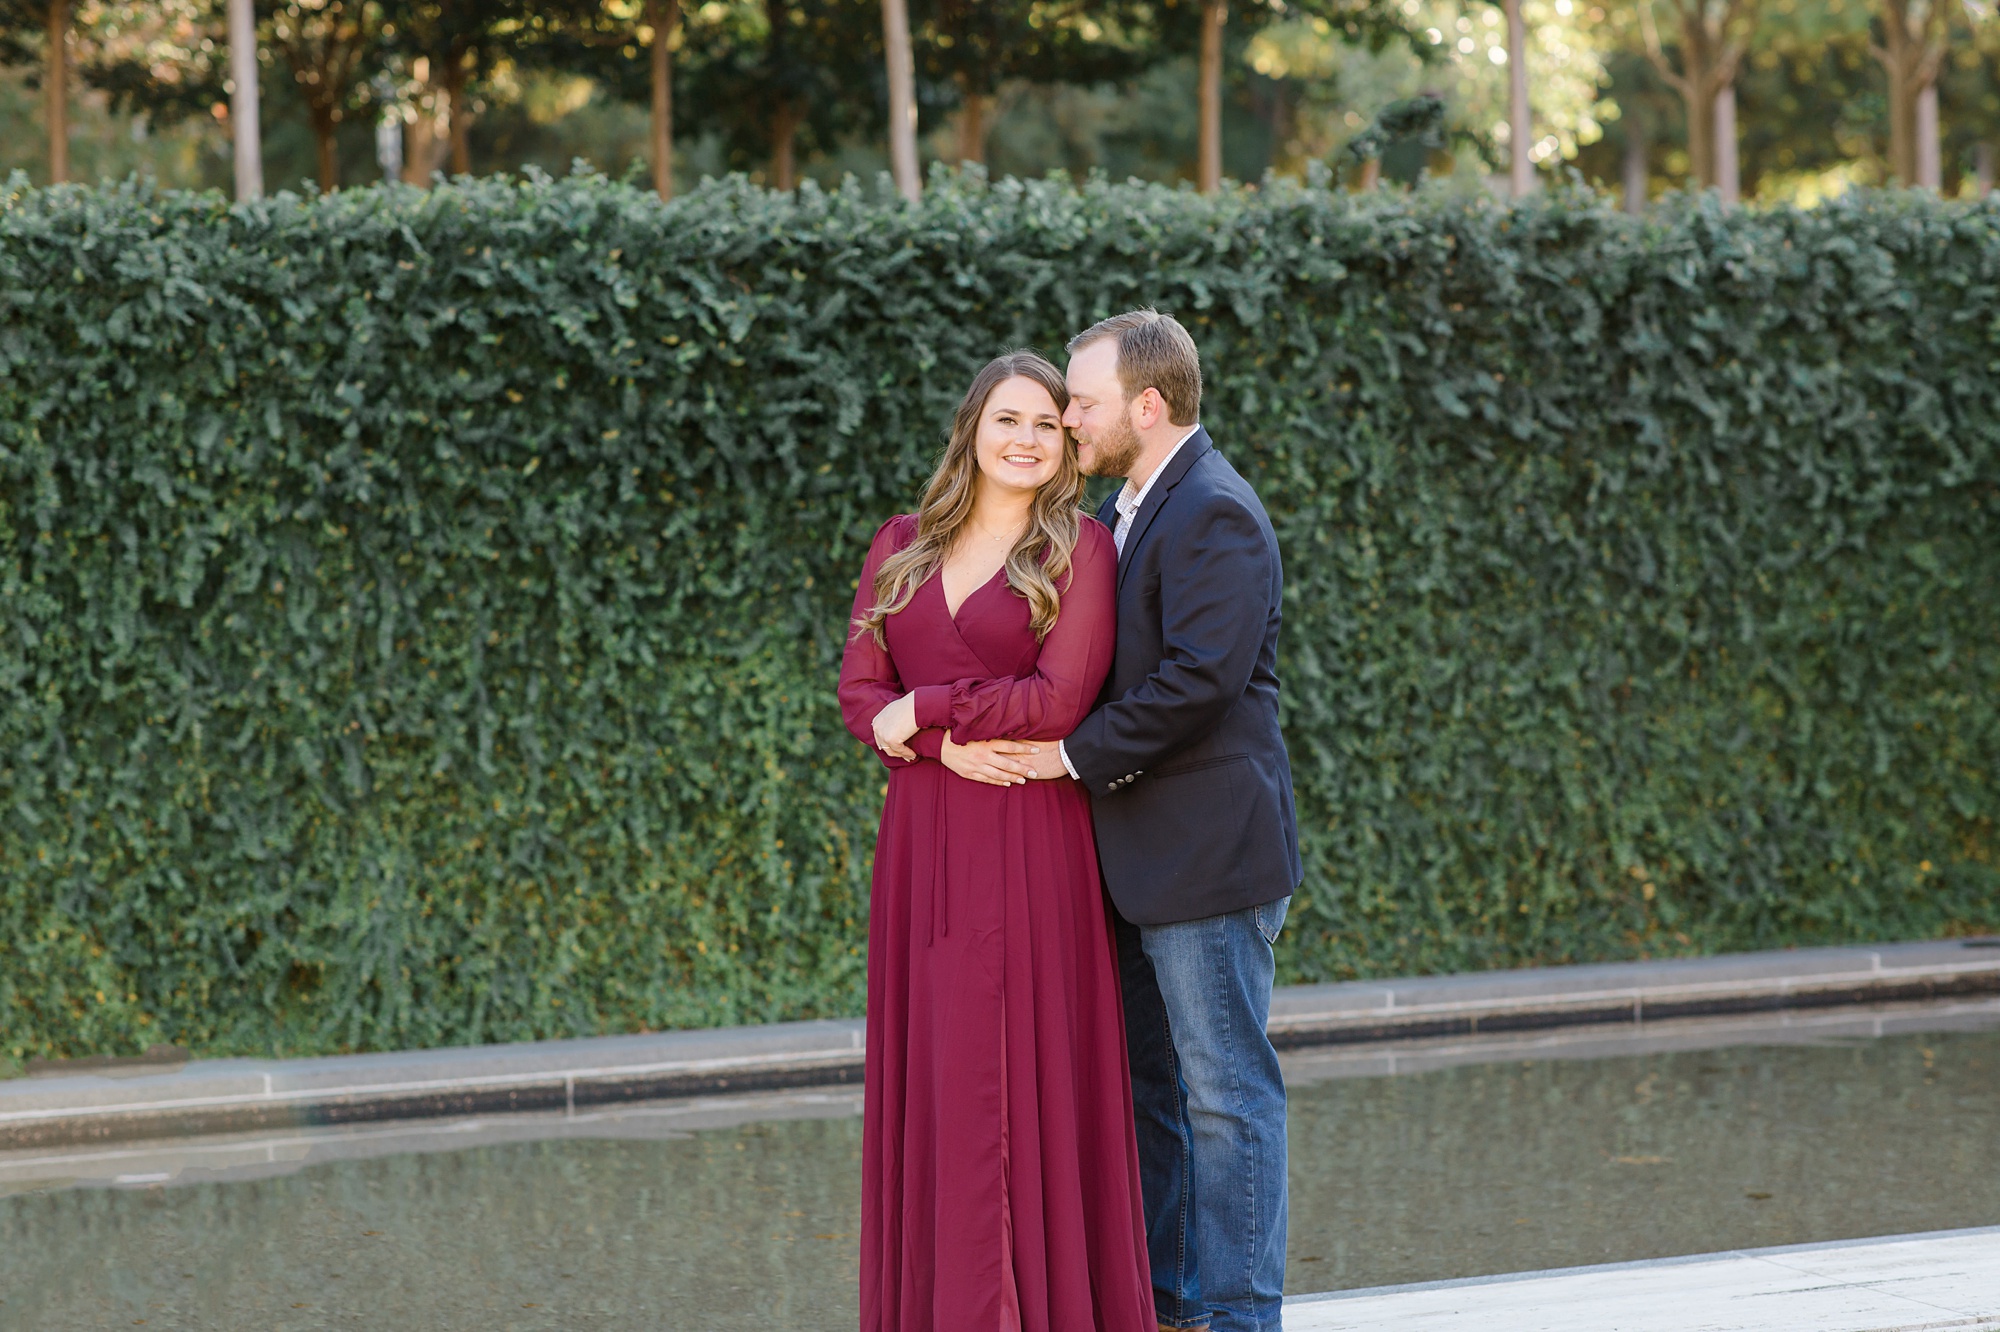 Kimball Art Museum engagement portraits of bride and groom